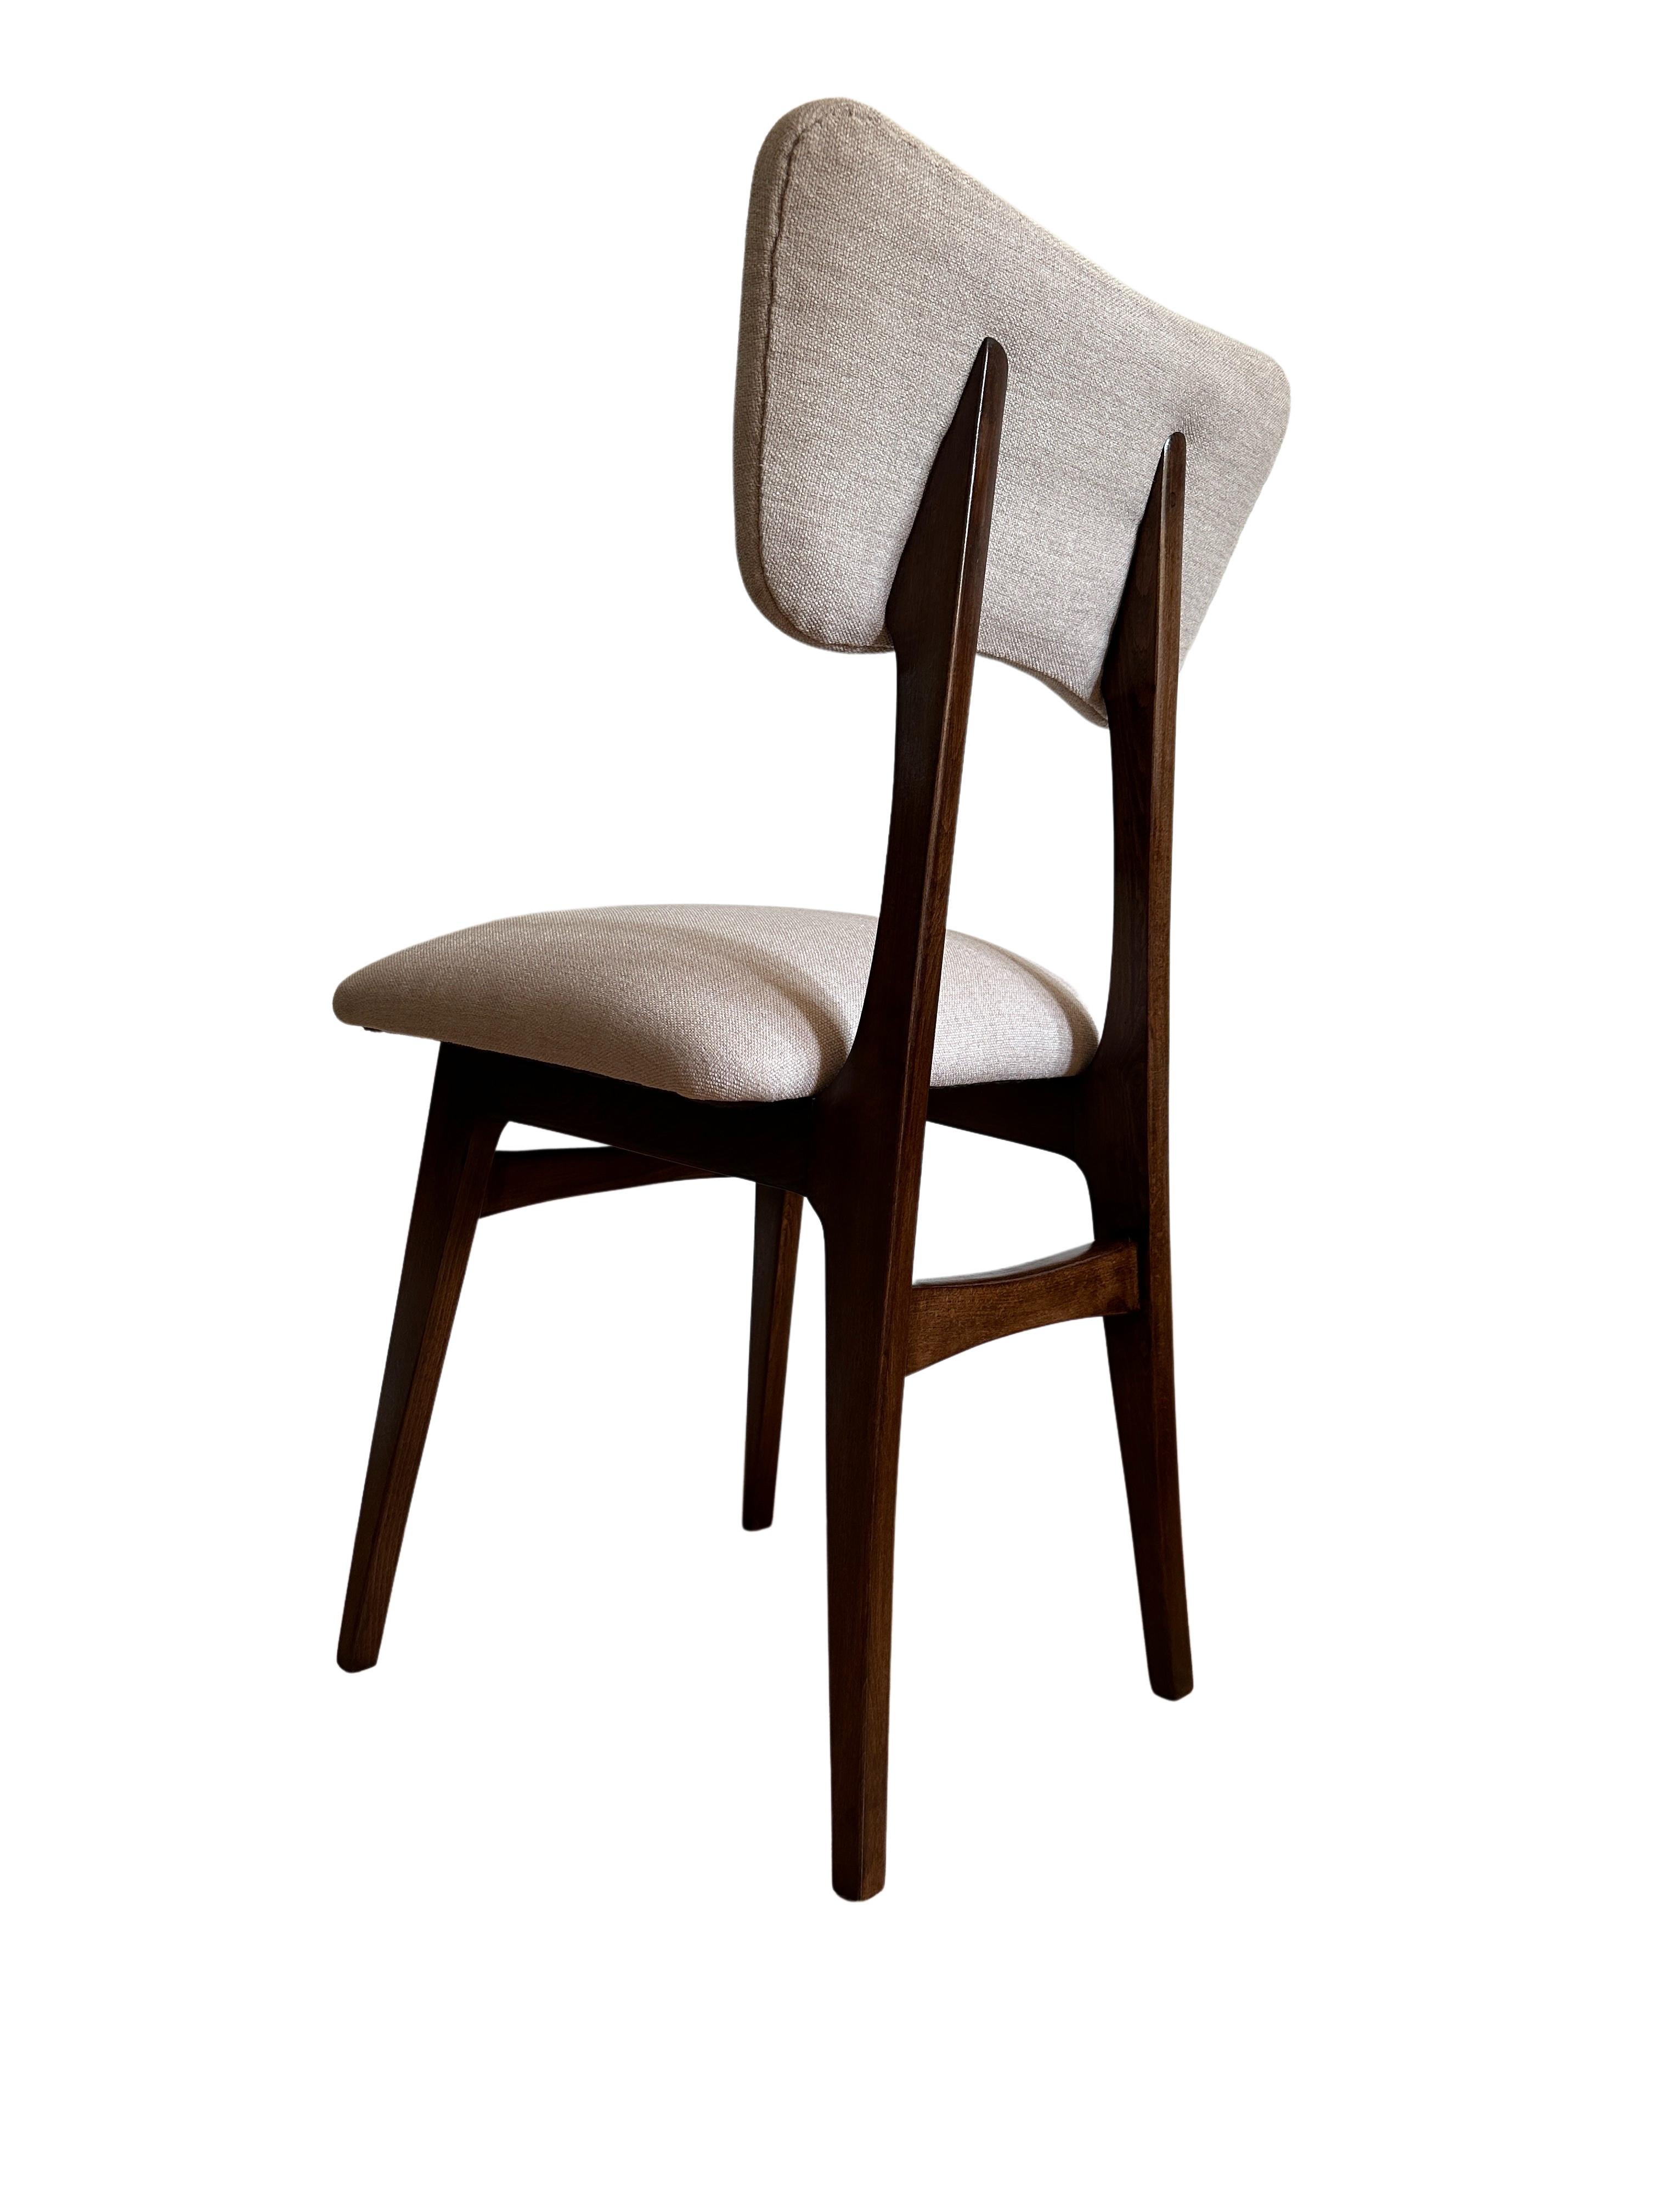 Set of 2 Midcentury Beige and Grey Dining Chairs, Europe, 1960s For Sale 1